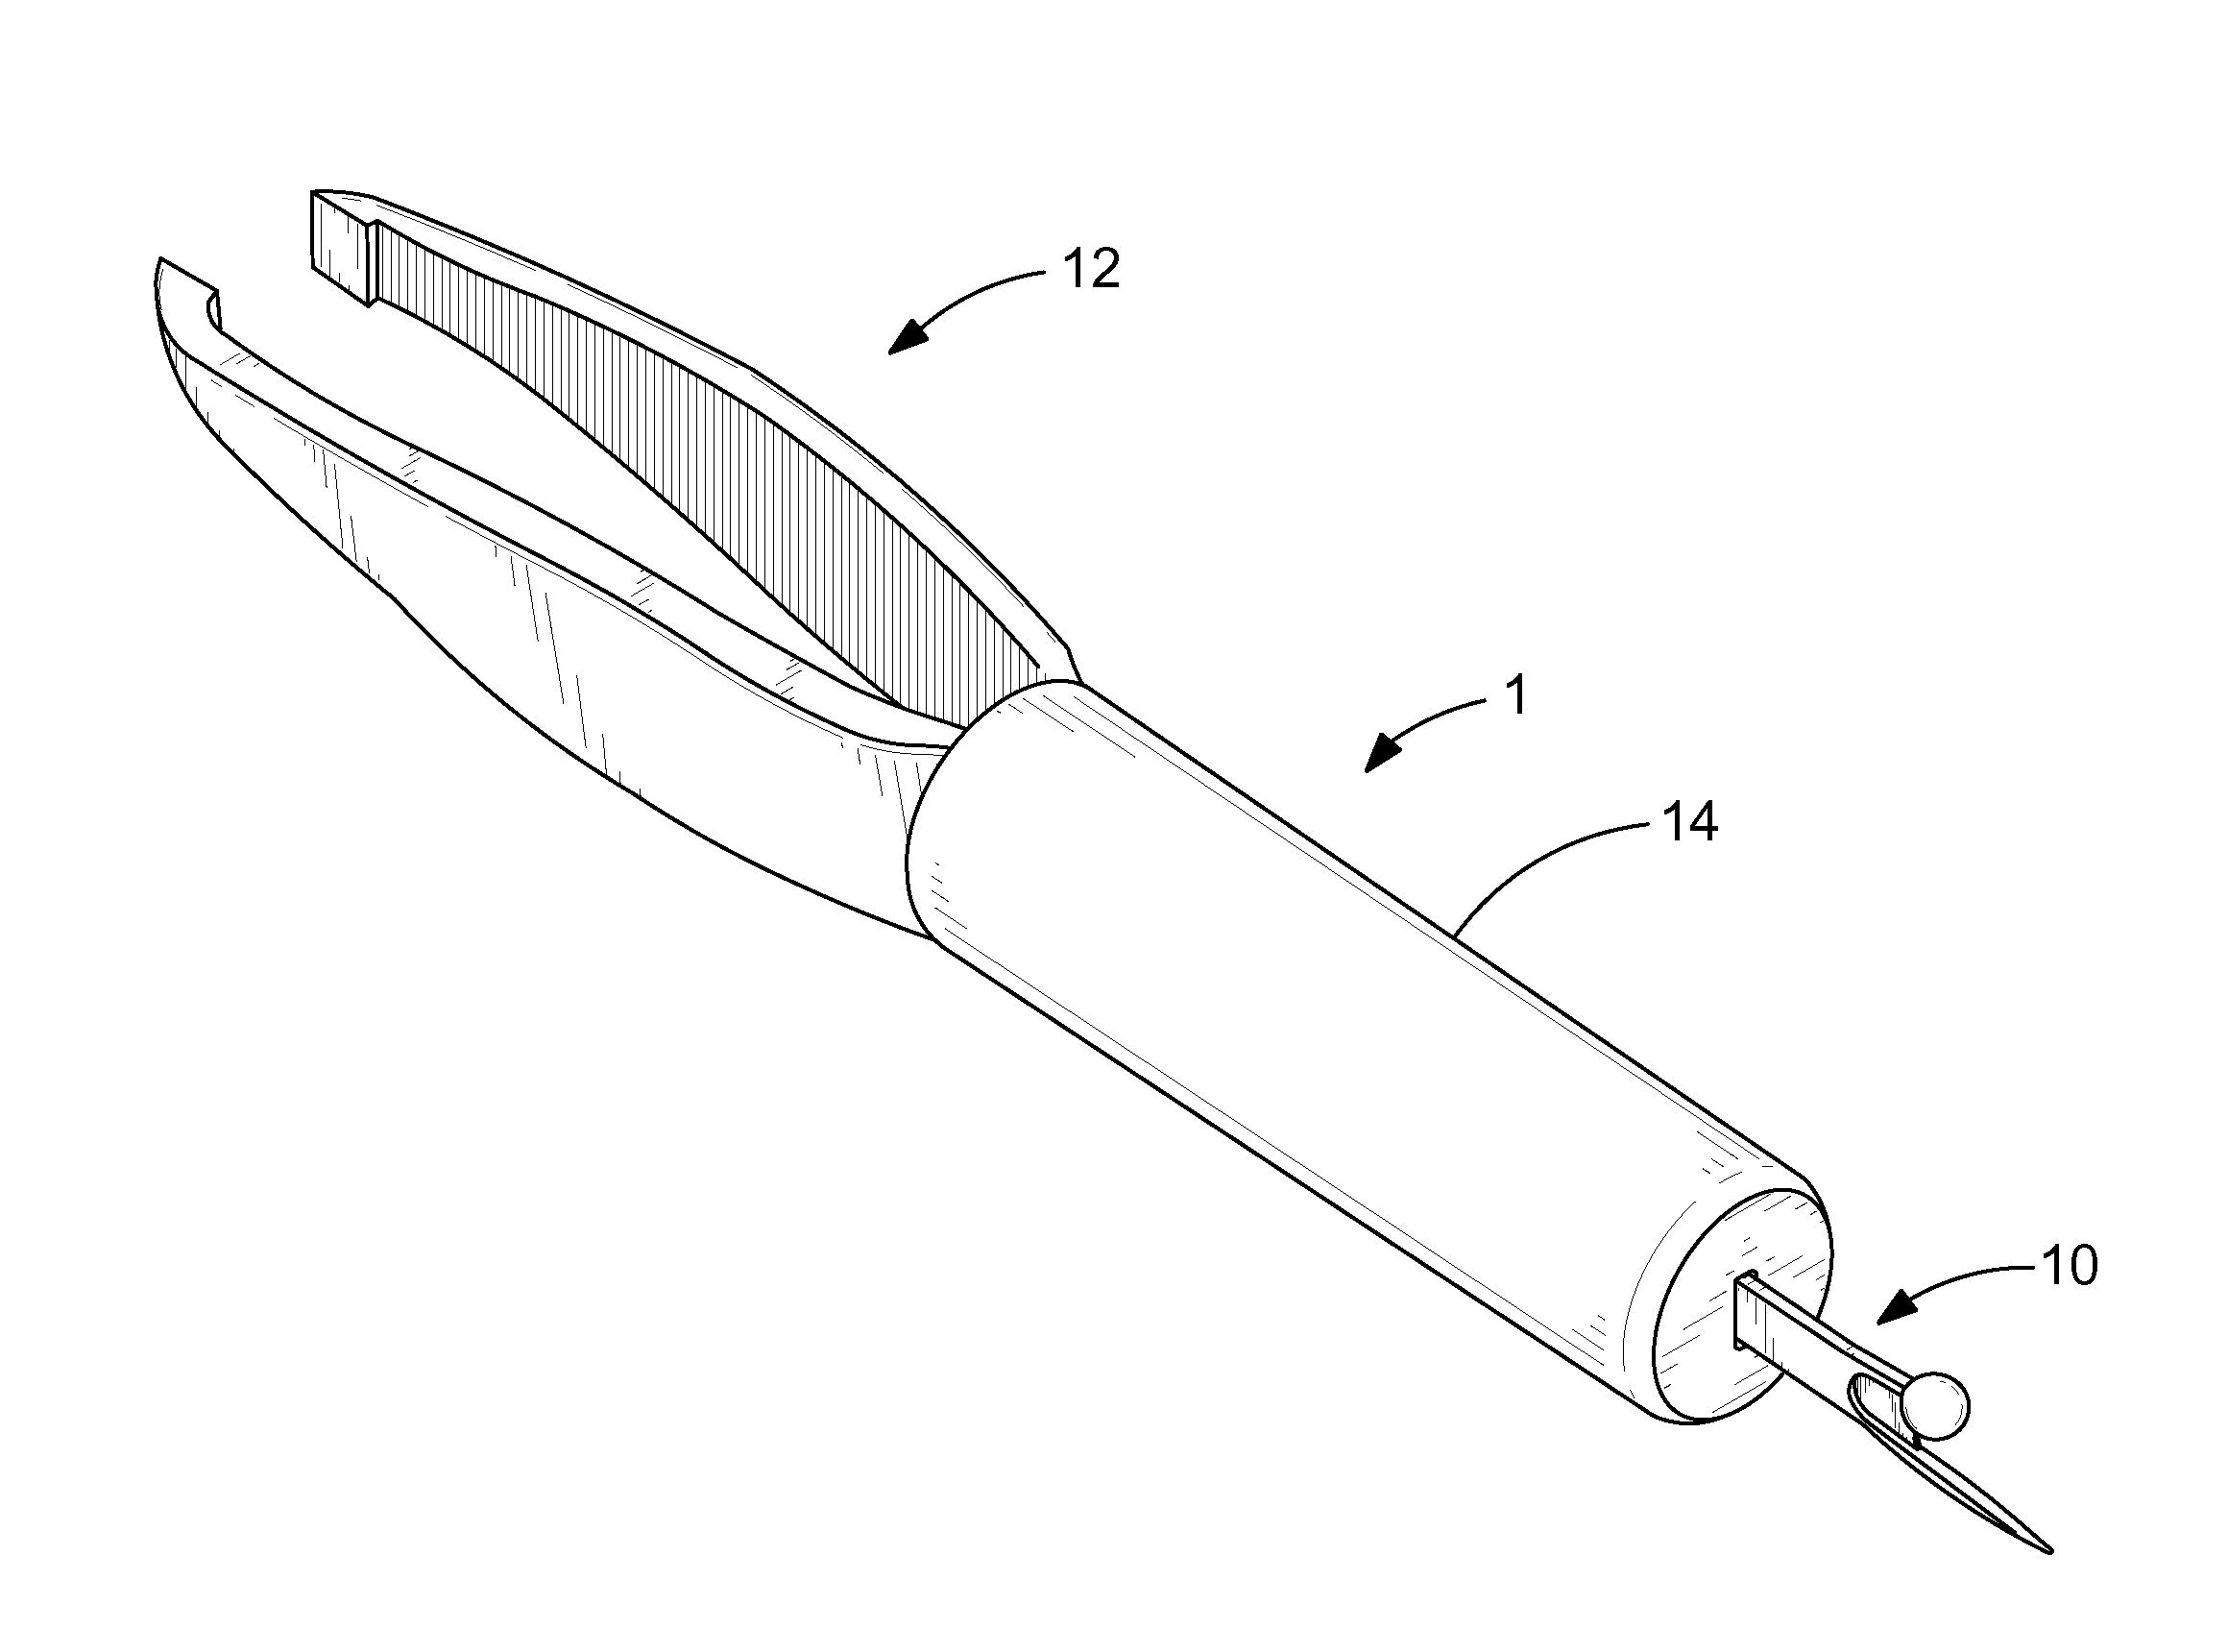 Thread removal device